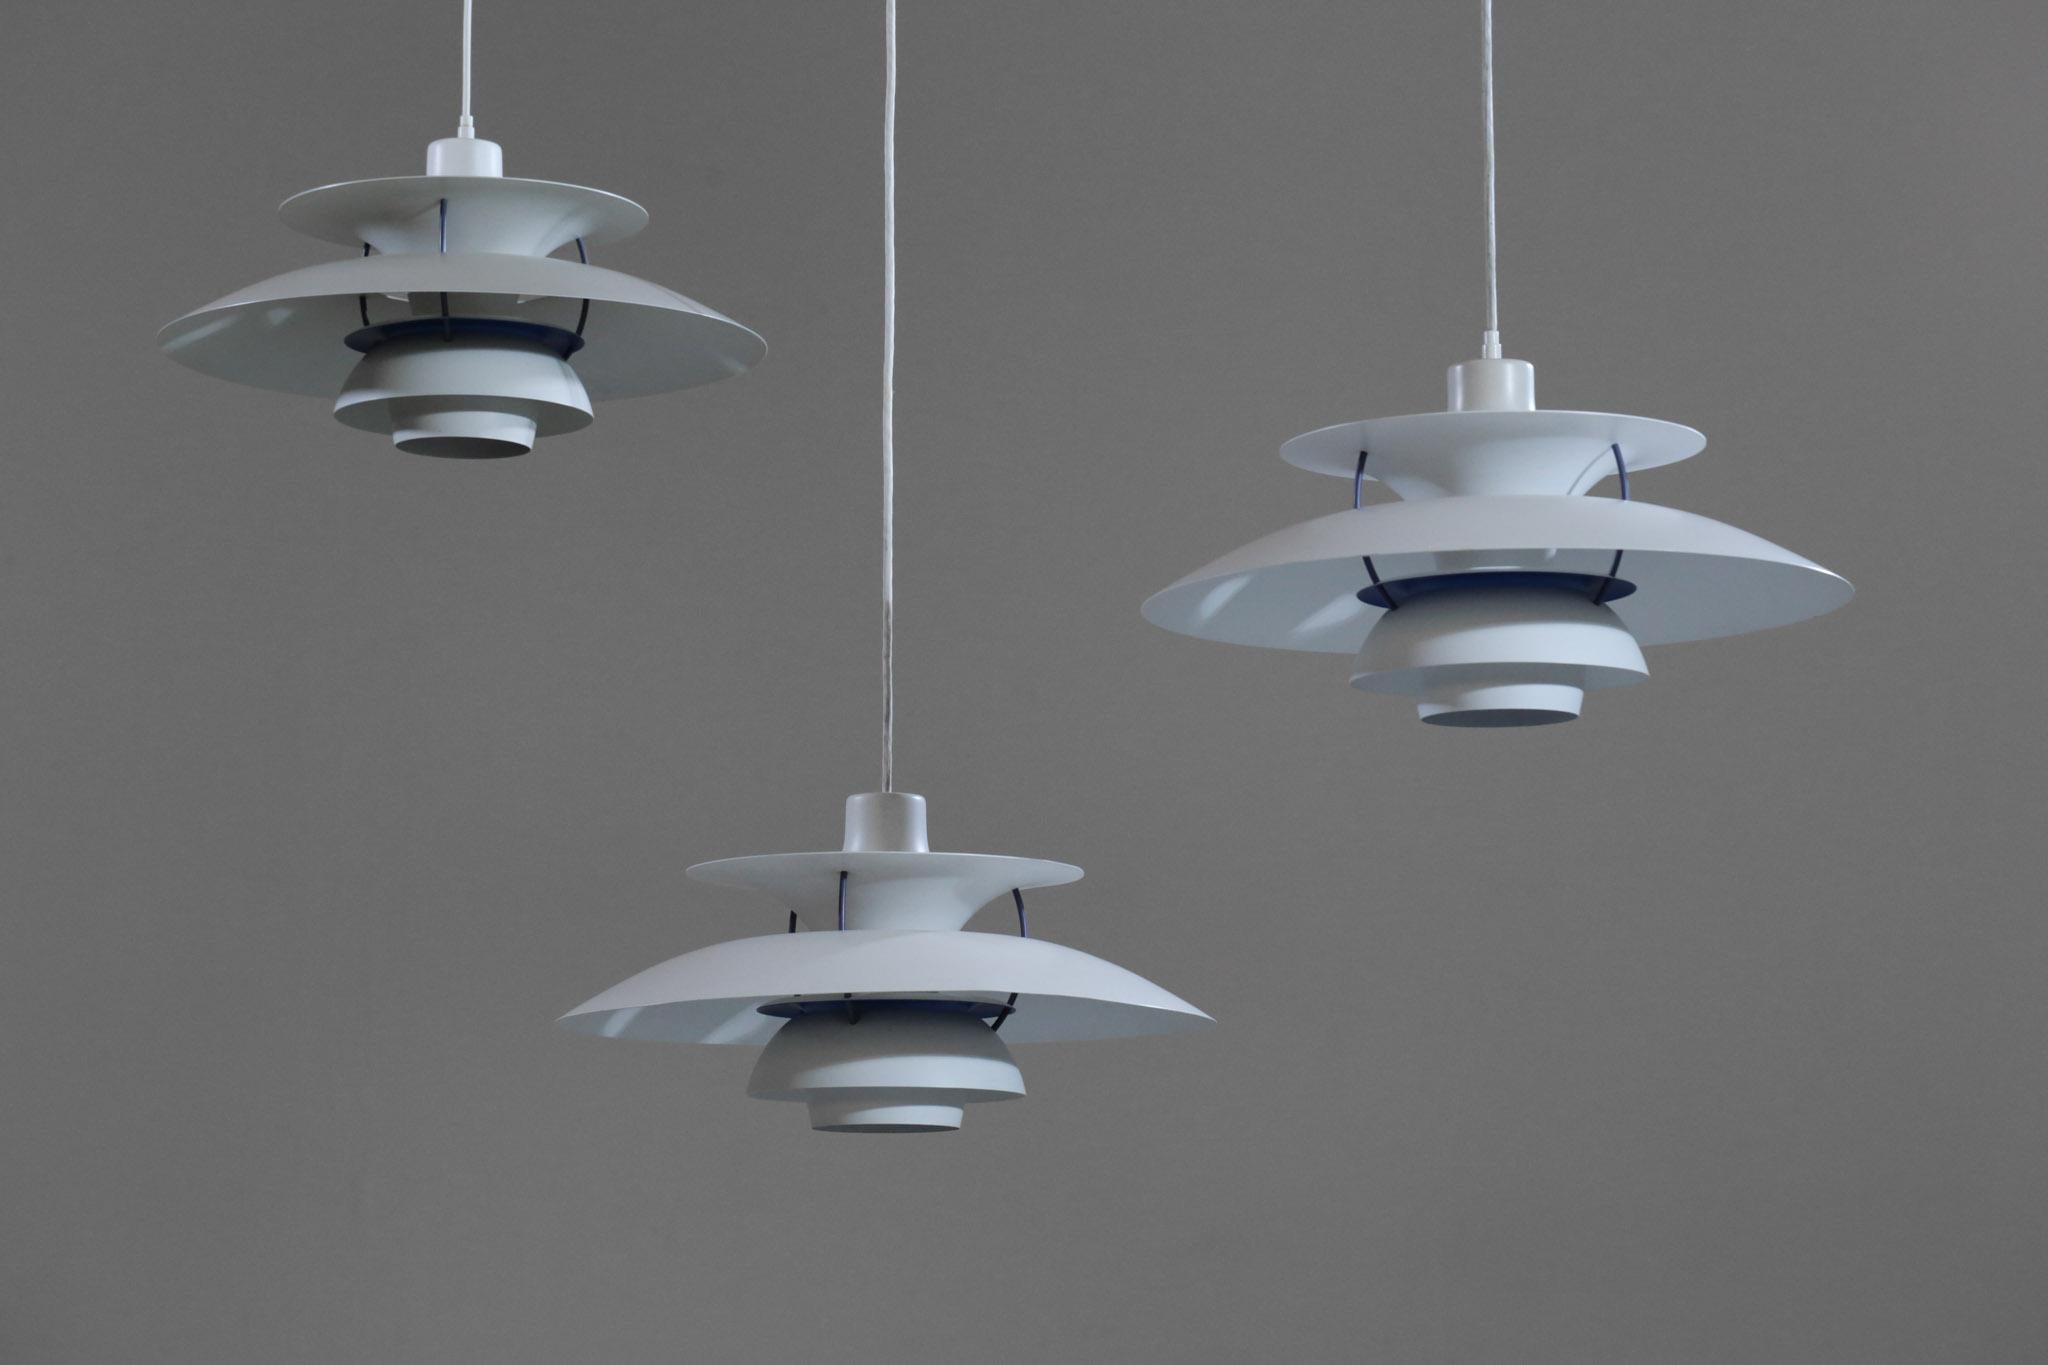 Set of 4 ceiling lamp by Poul Henningsen, model PH5, edited by Louis Poulsen. Structure in white with blue color inside.